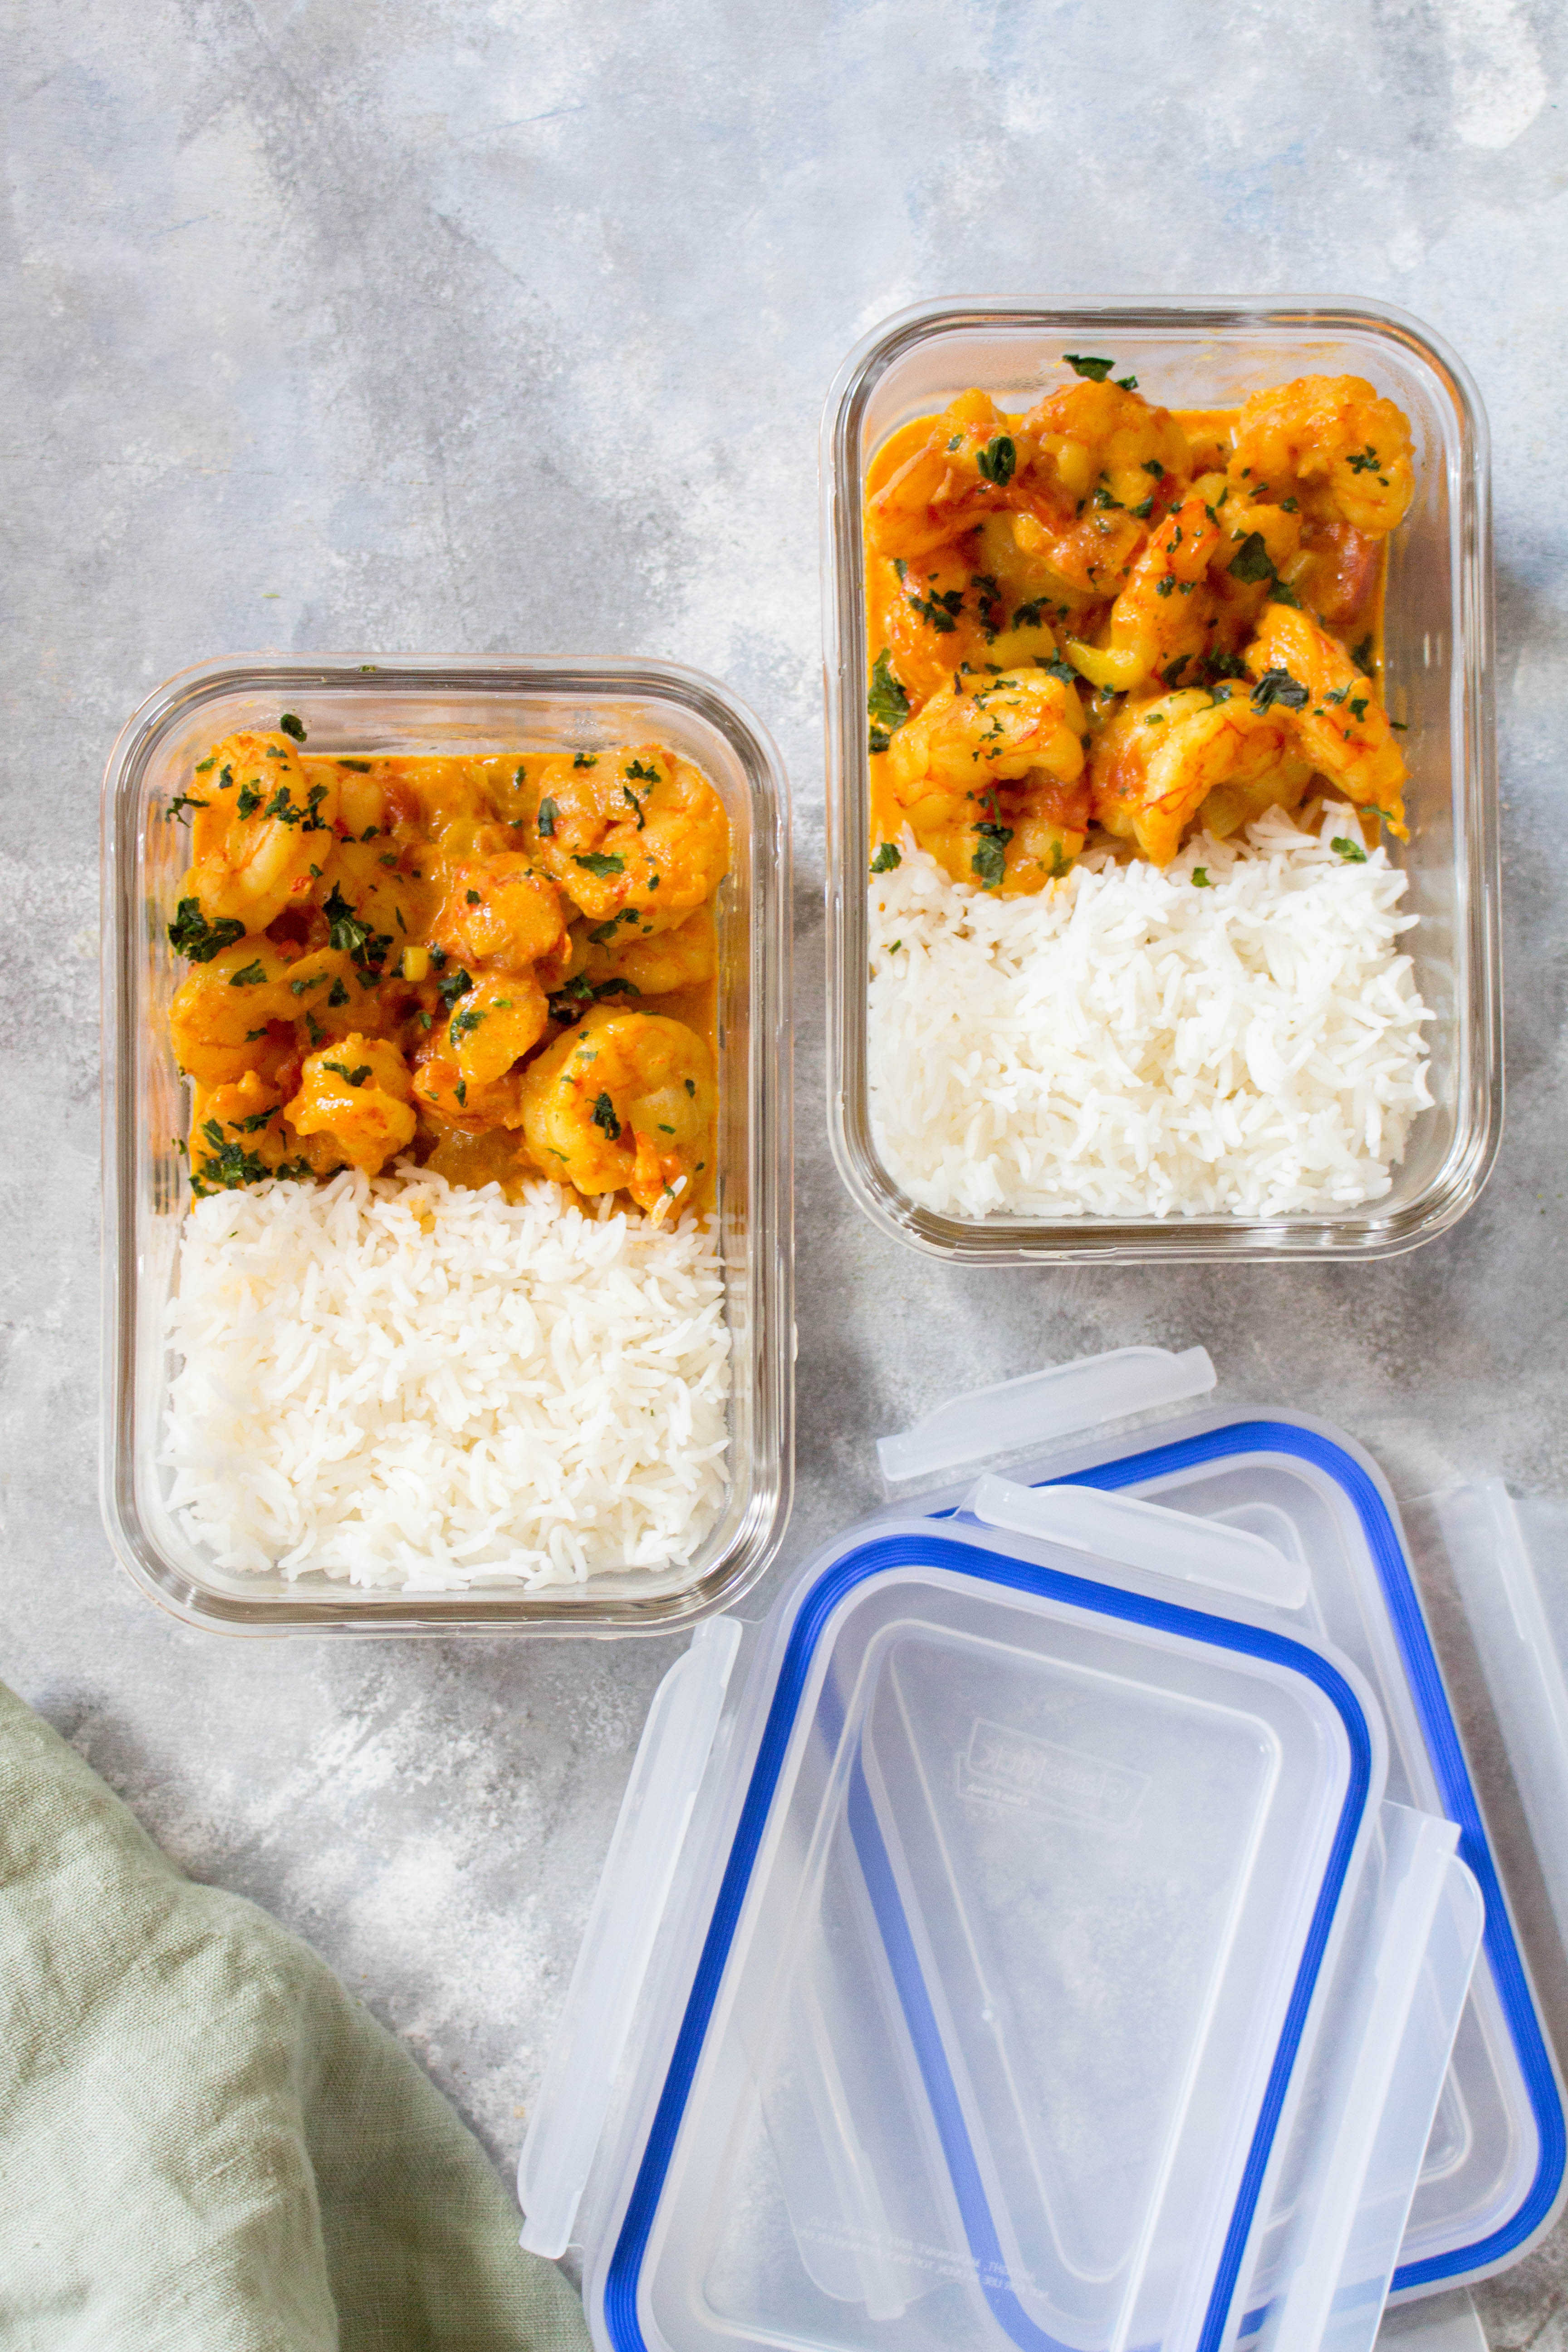 Made in under 30 minutes, this Curry Shrimp Meal Prep is so easy to make! These Wild Caught Argentinian Shrimp are coated with a delicious silky coconut curry that will have you reaching for seconds! It is perfect as a quick night dinner or as a meal prep. 